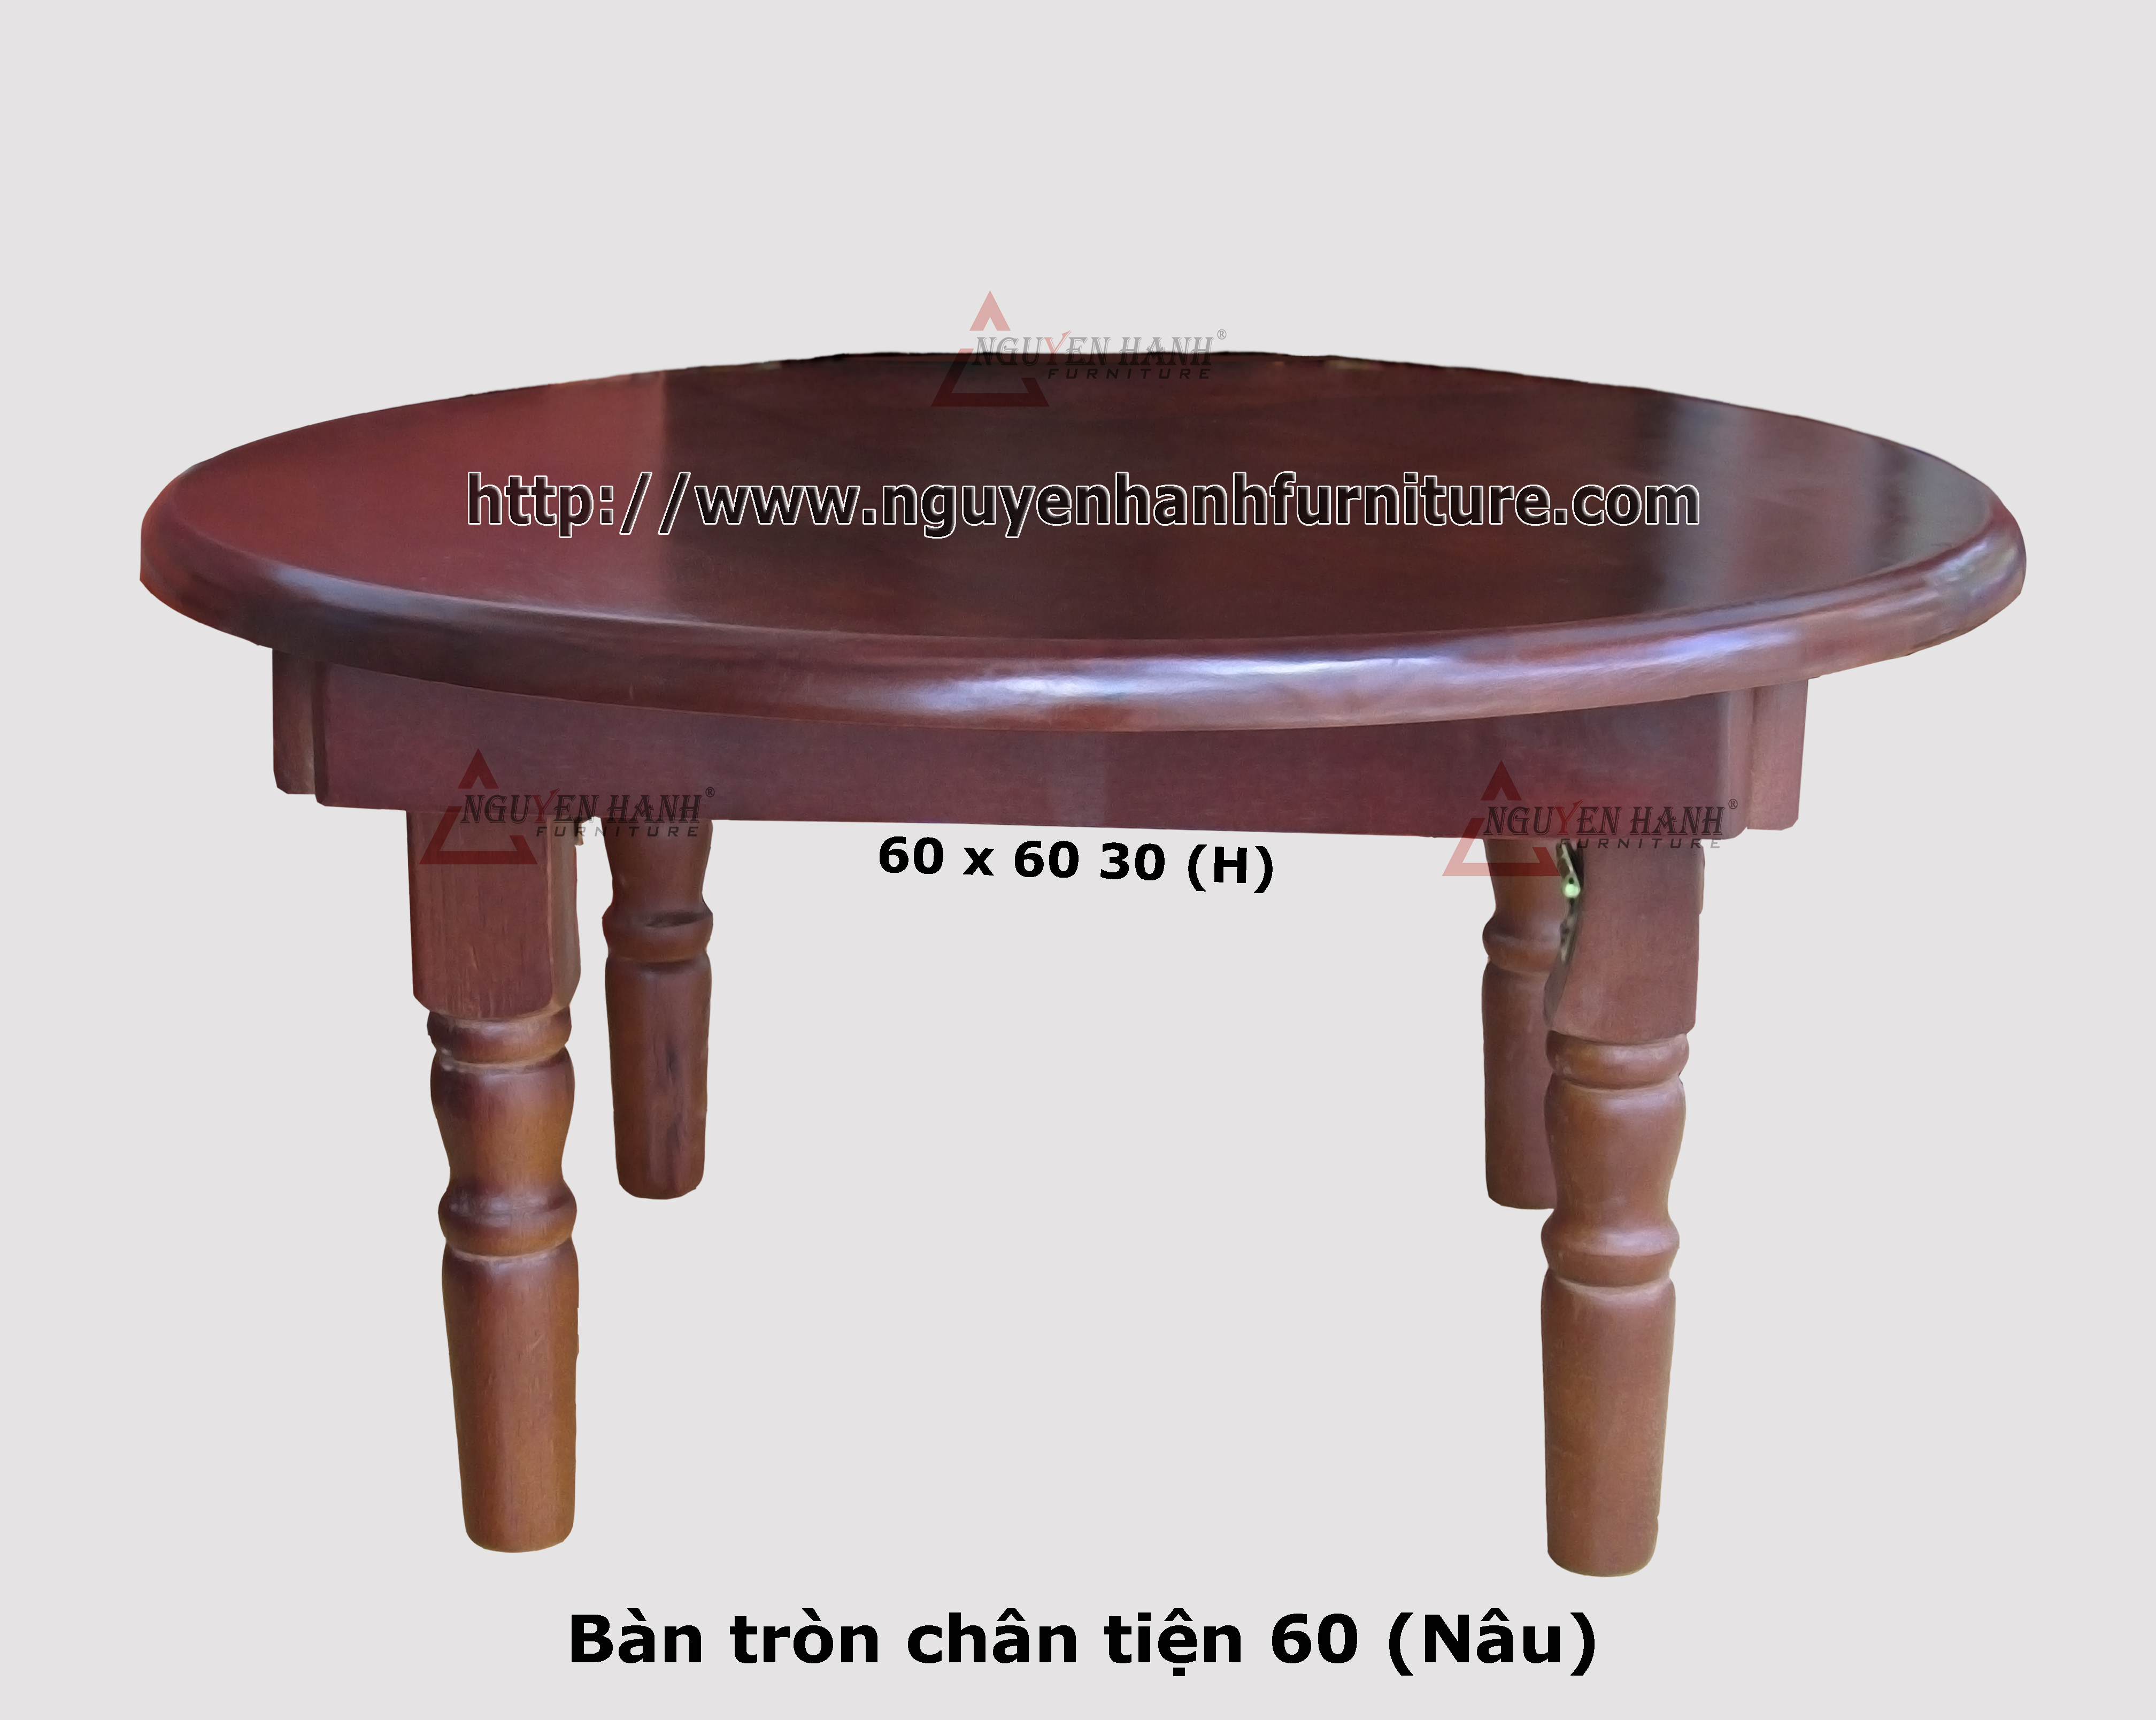 Name product: Round table with turnery legs (Brown) - Dimensions: 60 x 60 x 30 (H) - Description: Wood natural rubber 